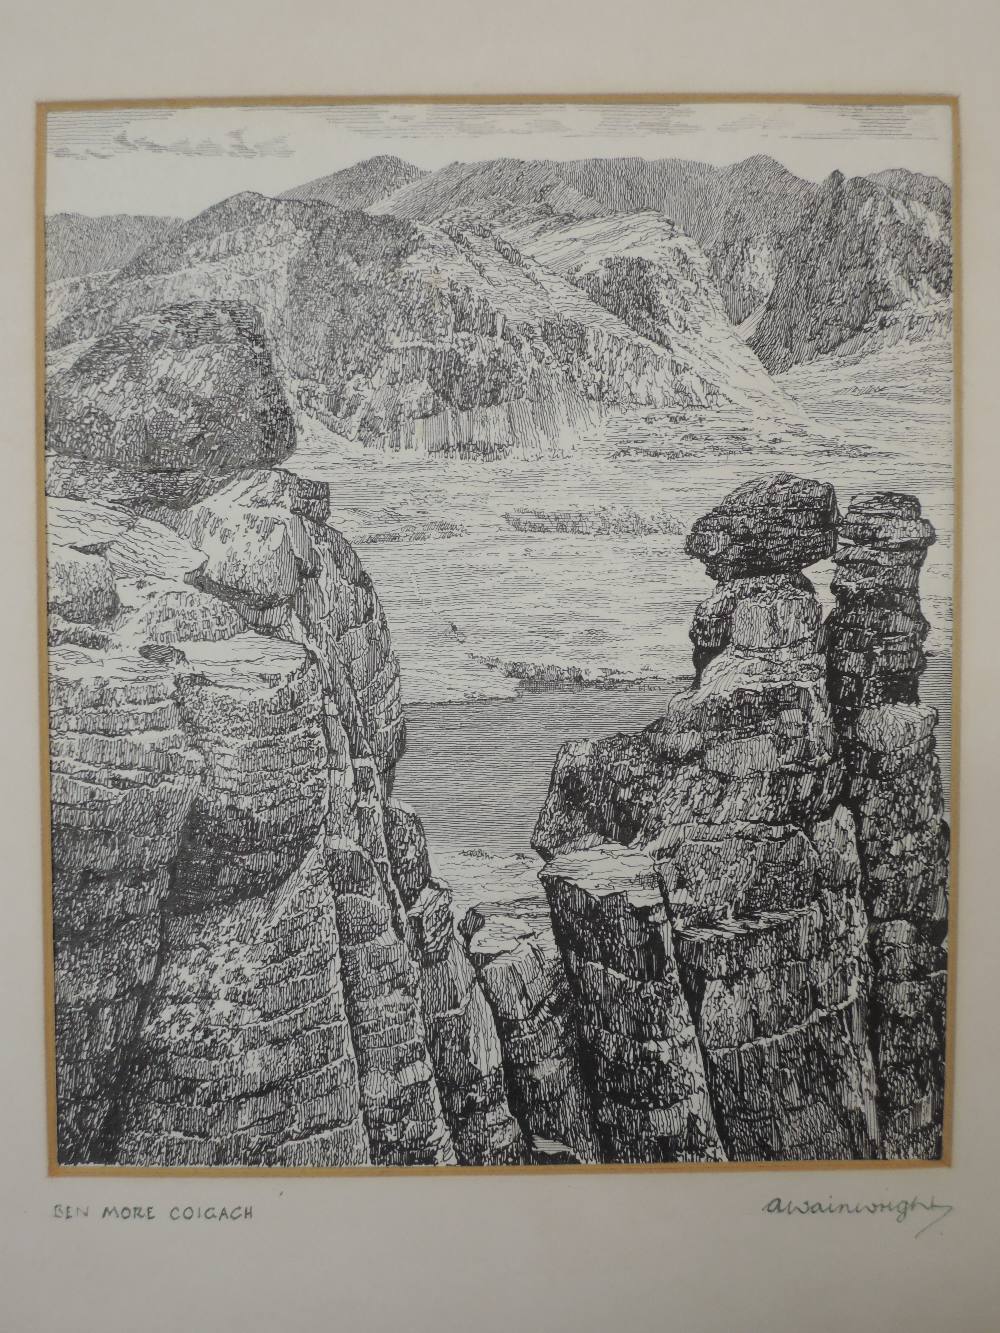 A pen and ink sketch, Alfred Wainwright, Ben More Coigach, signed, 18 x 15cm - Image 2 of 2